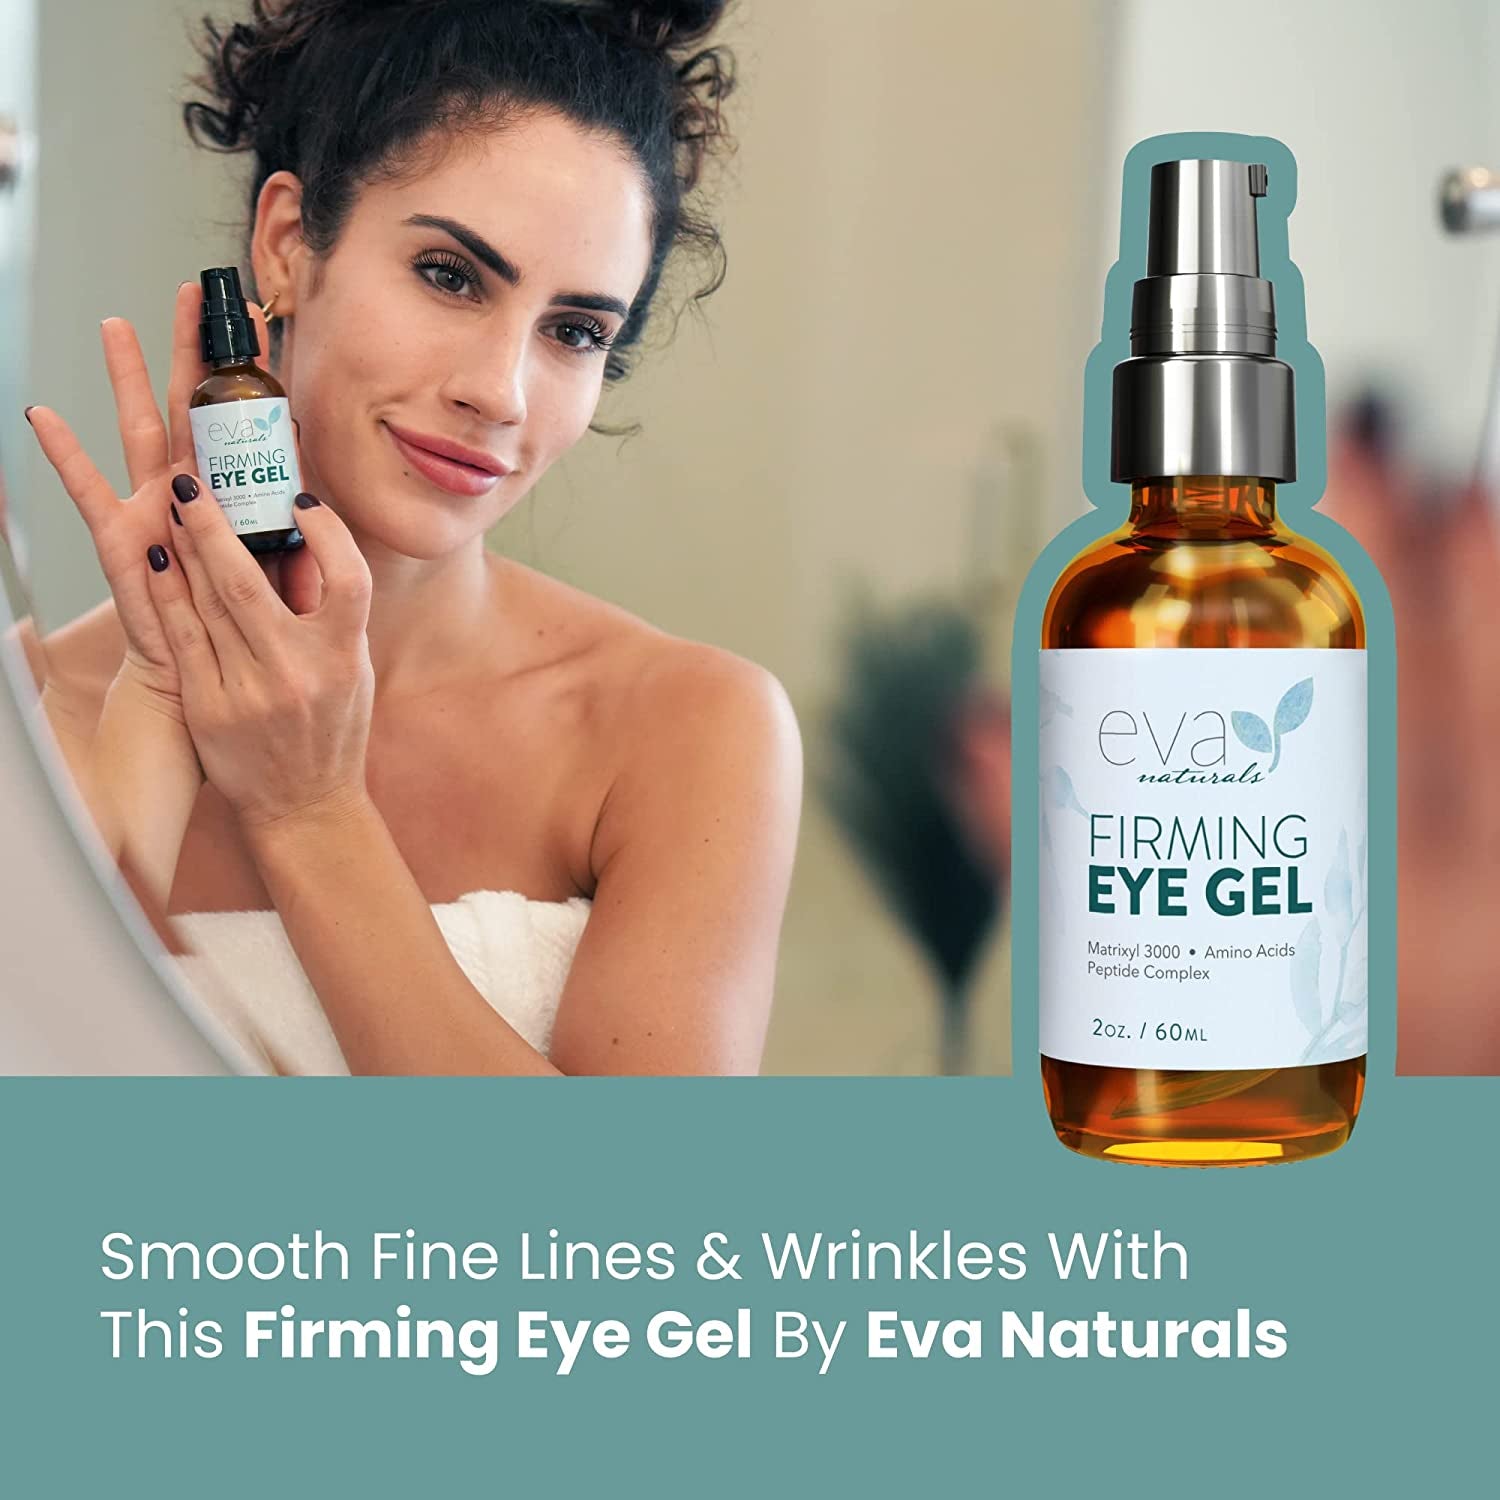 Anti-Aging Eye Gel - Luxurious Hydrating Under Eye Cream For Dark Circles and Puffiness, Bags, Crows Feet, Wrinkles - With Hyaluronic Acid & Skin-Firming Peptides Eye Serum (2 oz.)